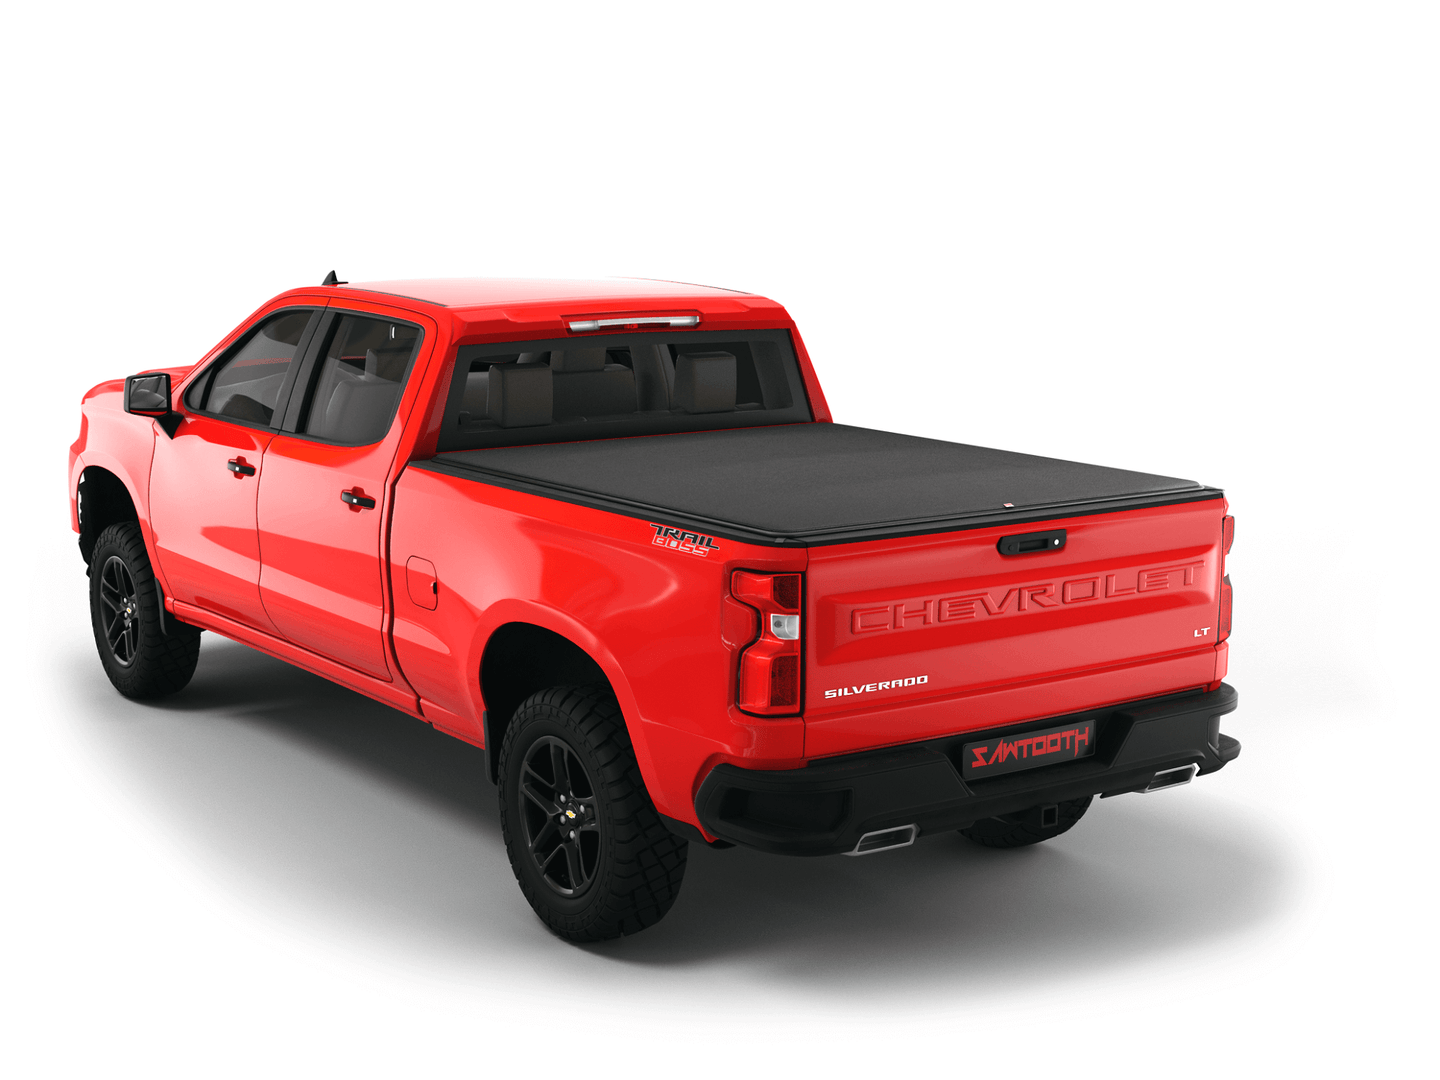 Red Chevrolet Silverado 1500 / GMC Sierra 1500 with flat Sawtooth Stretch expandable tonneau cover